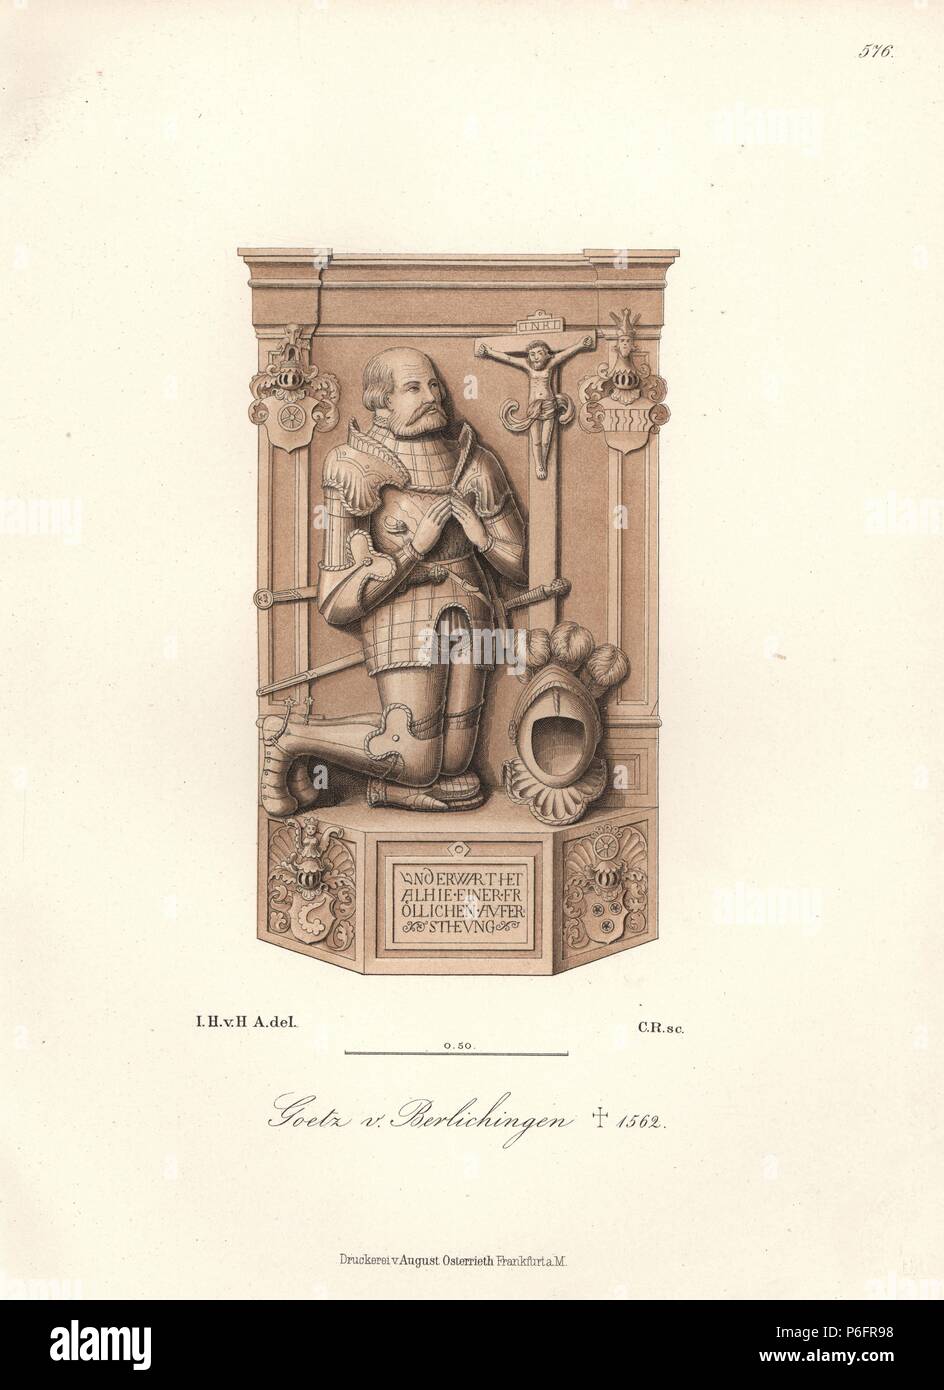 Gottfried Goetz von Berlichingen, died 1562. German Imperial Knight and mercenary kneeling, in suit of armour, with helm and coat of arms. From his tombstone in Schoenthal Priory. Chromolithograph from Hefner-Alteneck's 'Costumes, Artworks and Appliances from the Middle Ages to the 17th Century,' Frankfurt, 1889. Illustration by Dr. Jakob Heinrich von Hefner-Alteneck, lithographed by C. Regnier. Dr. Hefner-Alteneck (1811-1903) was a German museum curator, archaeologist, art historian, illustrator and etcher. Stock Photo